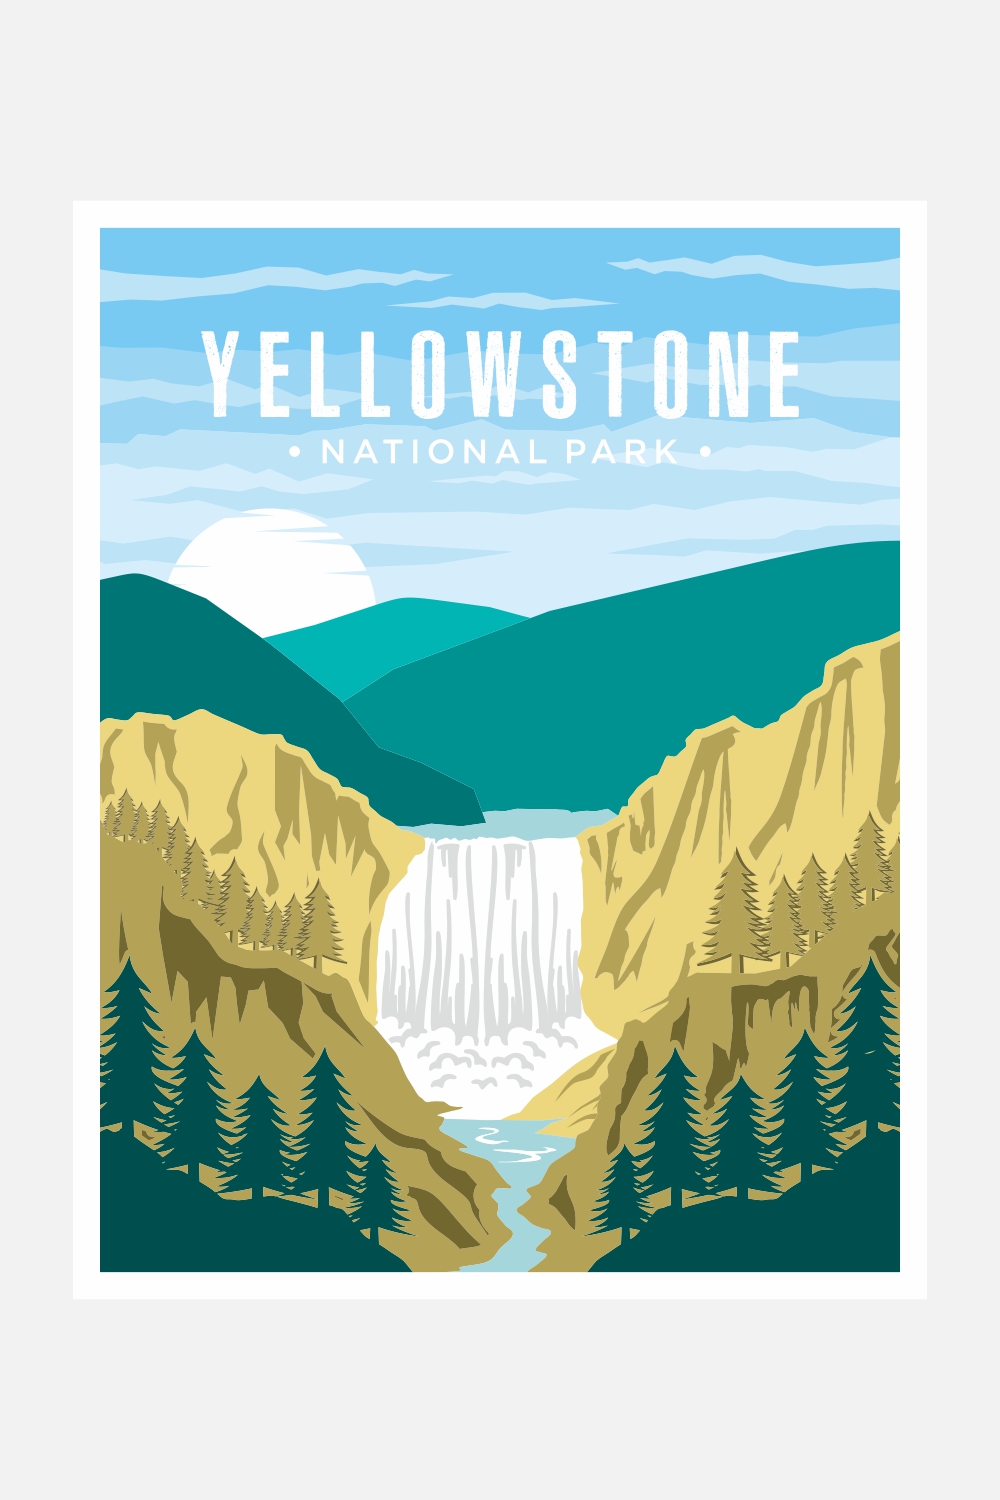 Yellowstone Falls National Park poster vector illustration design – Only $8 pinterest preview image.